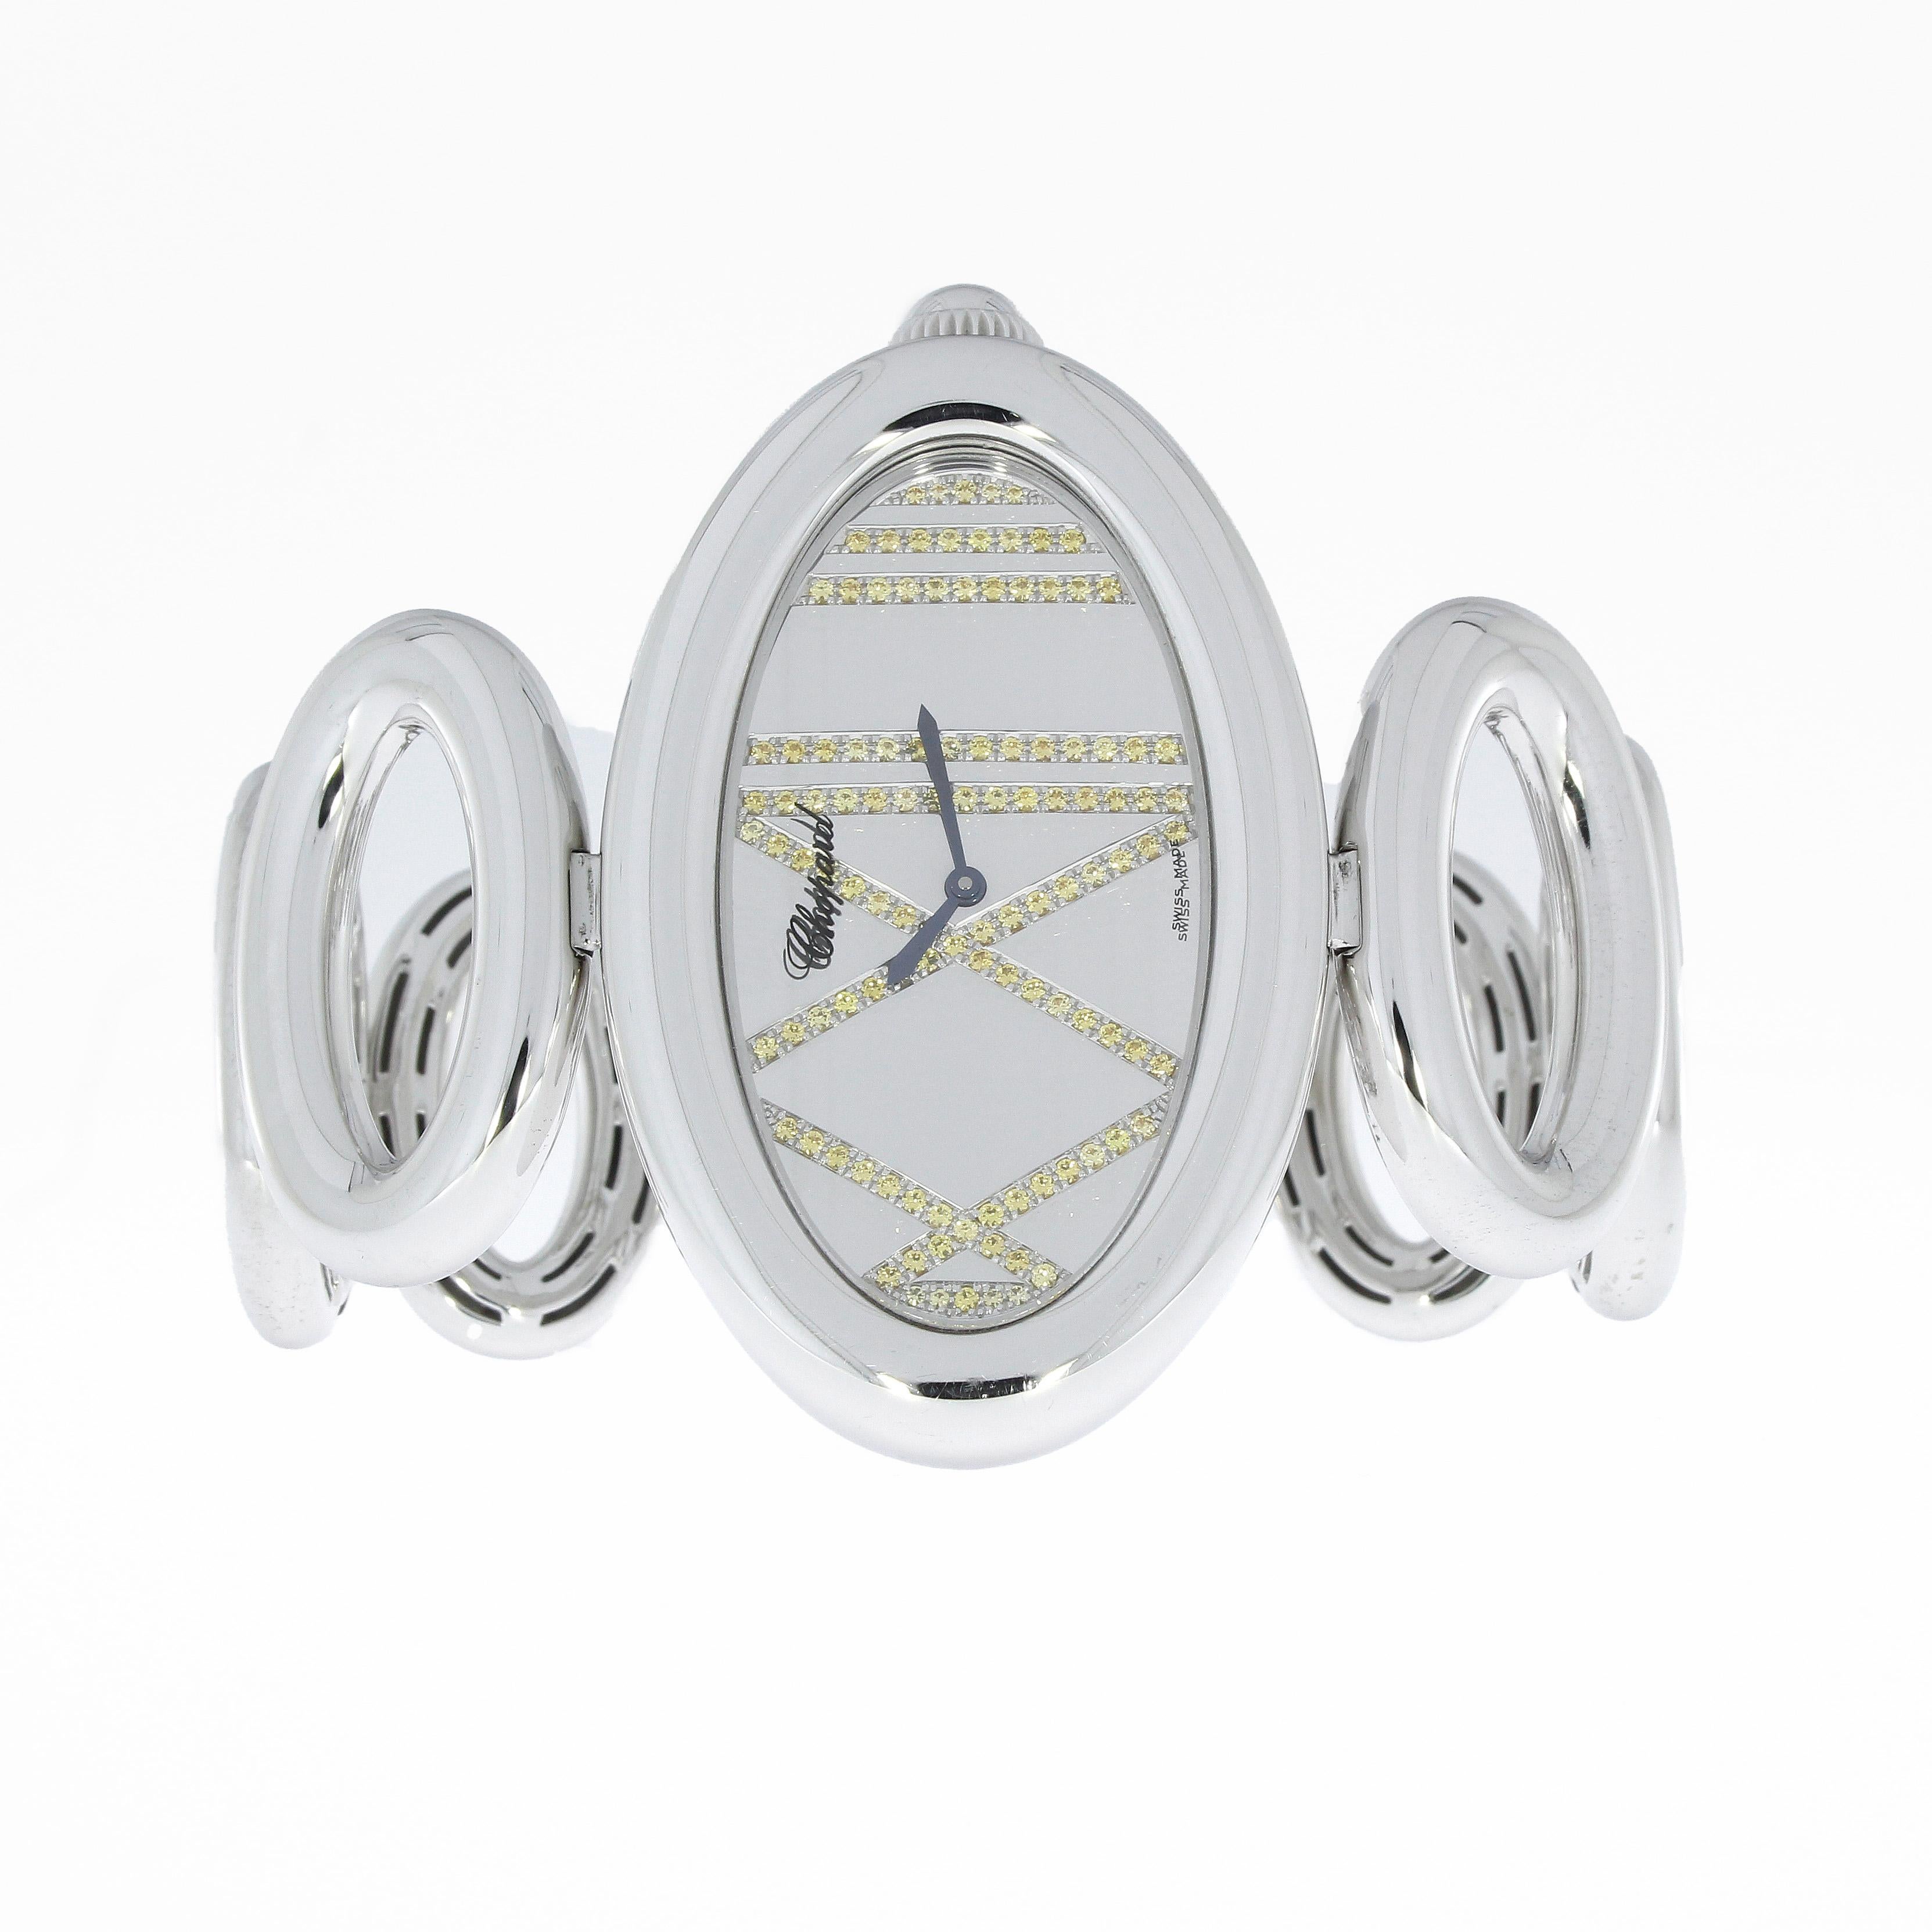 Oval Chopard Cat Eye Ladies Quartz Watch in 18k white gold and a beautiful silver dial with 111 yellow sapphires (0.87ct.)

Measurements: 55x35mm
Total length incl. bracelet - 190mm
Weight: 192gr.

